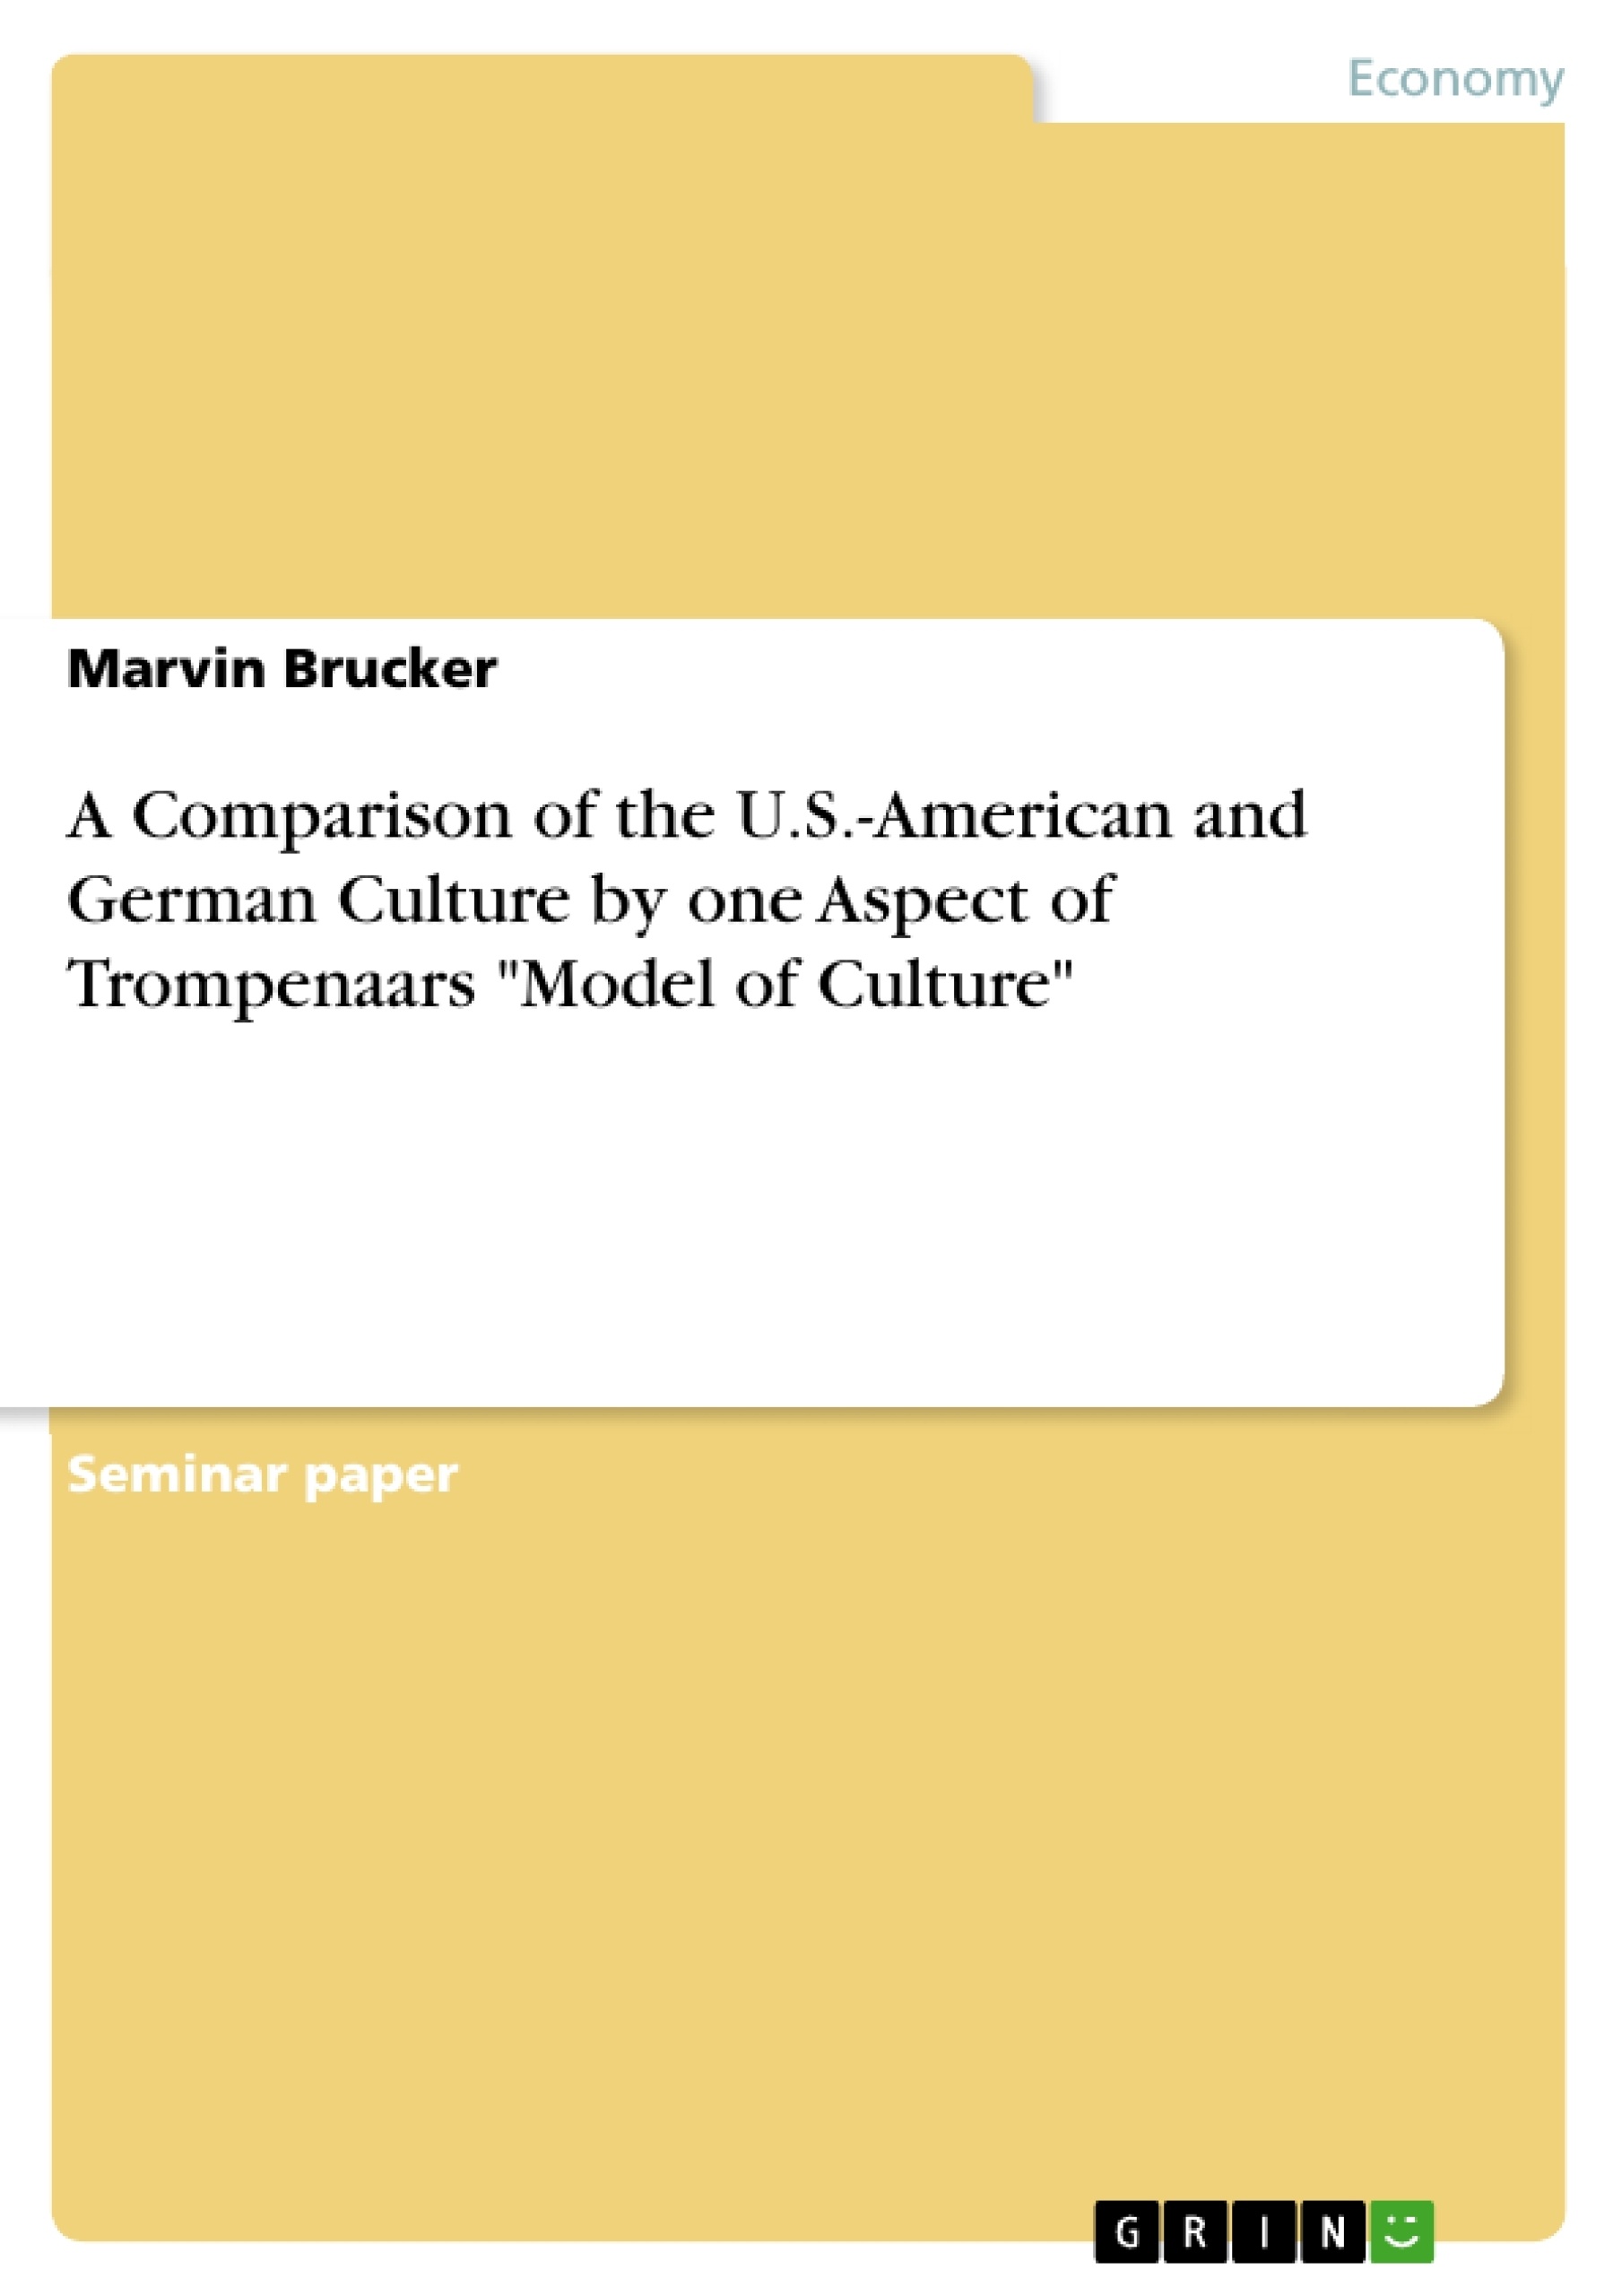 Title: A Comparison of the U.S.-American and German Culture by one Aspect of Trompenaars "Model of Culture"